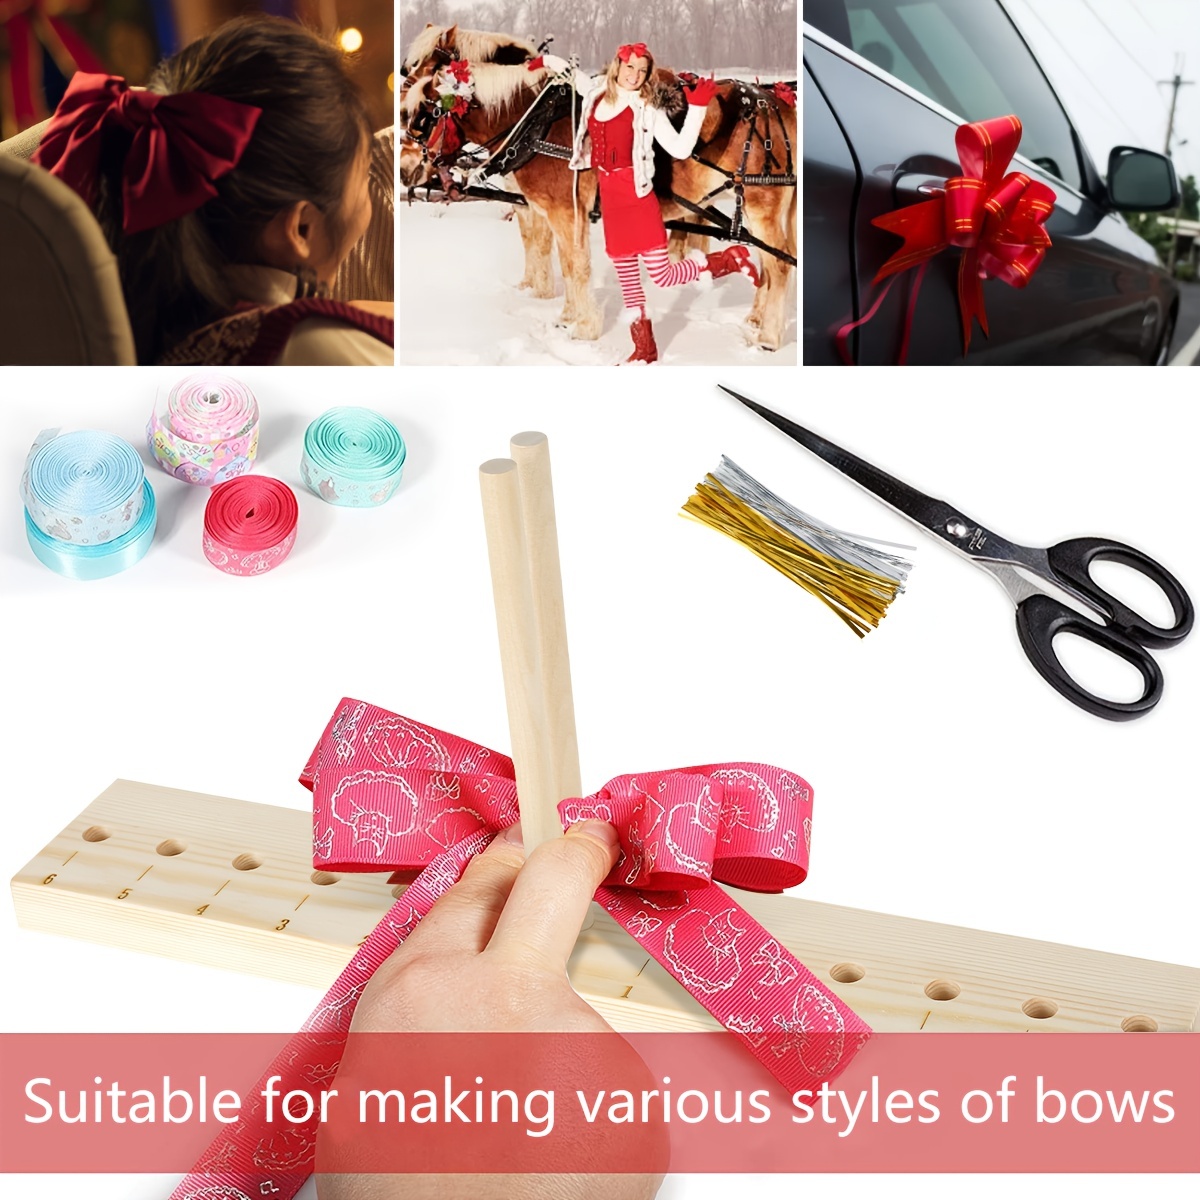  Bow Maker Bow Making Tool for Ribbon,Wooden Wreath Bow Maker  for Making Gift Bows,Lightweight Portable Adjustable Pin Wooden Board  Sticks Bow Making Kit for DIY Making Ribbon Crafts : Arts, Crafts